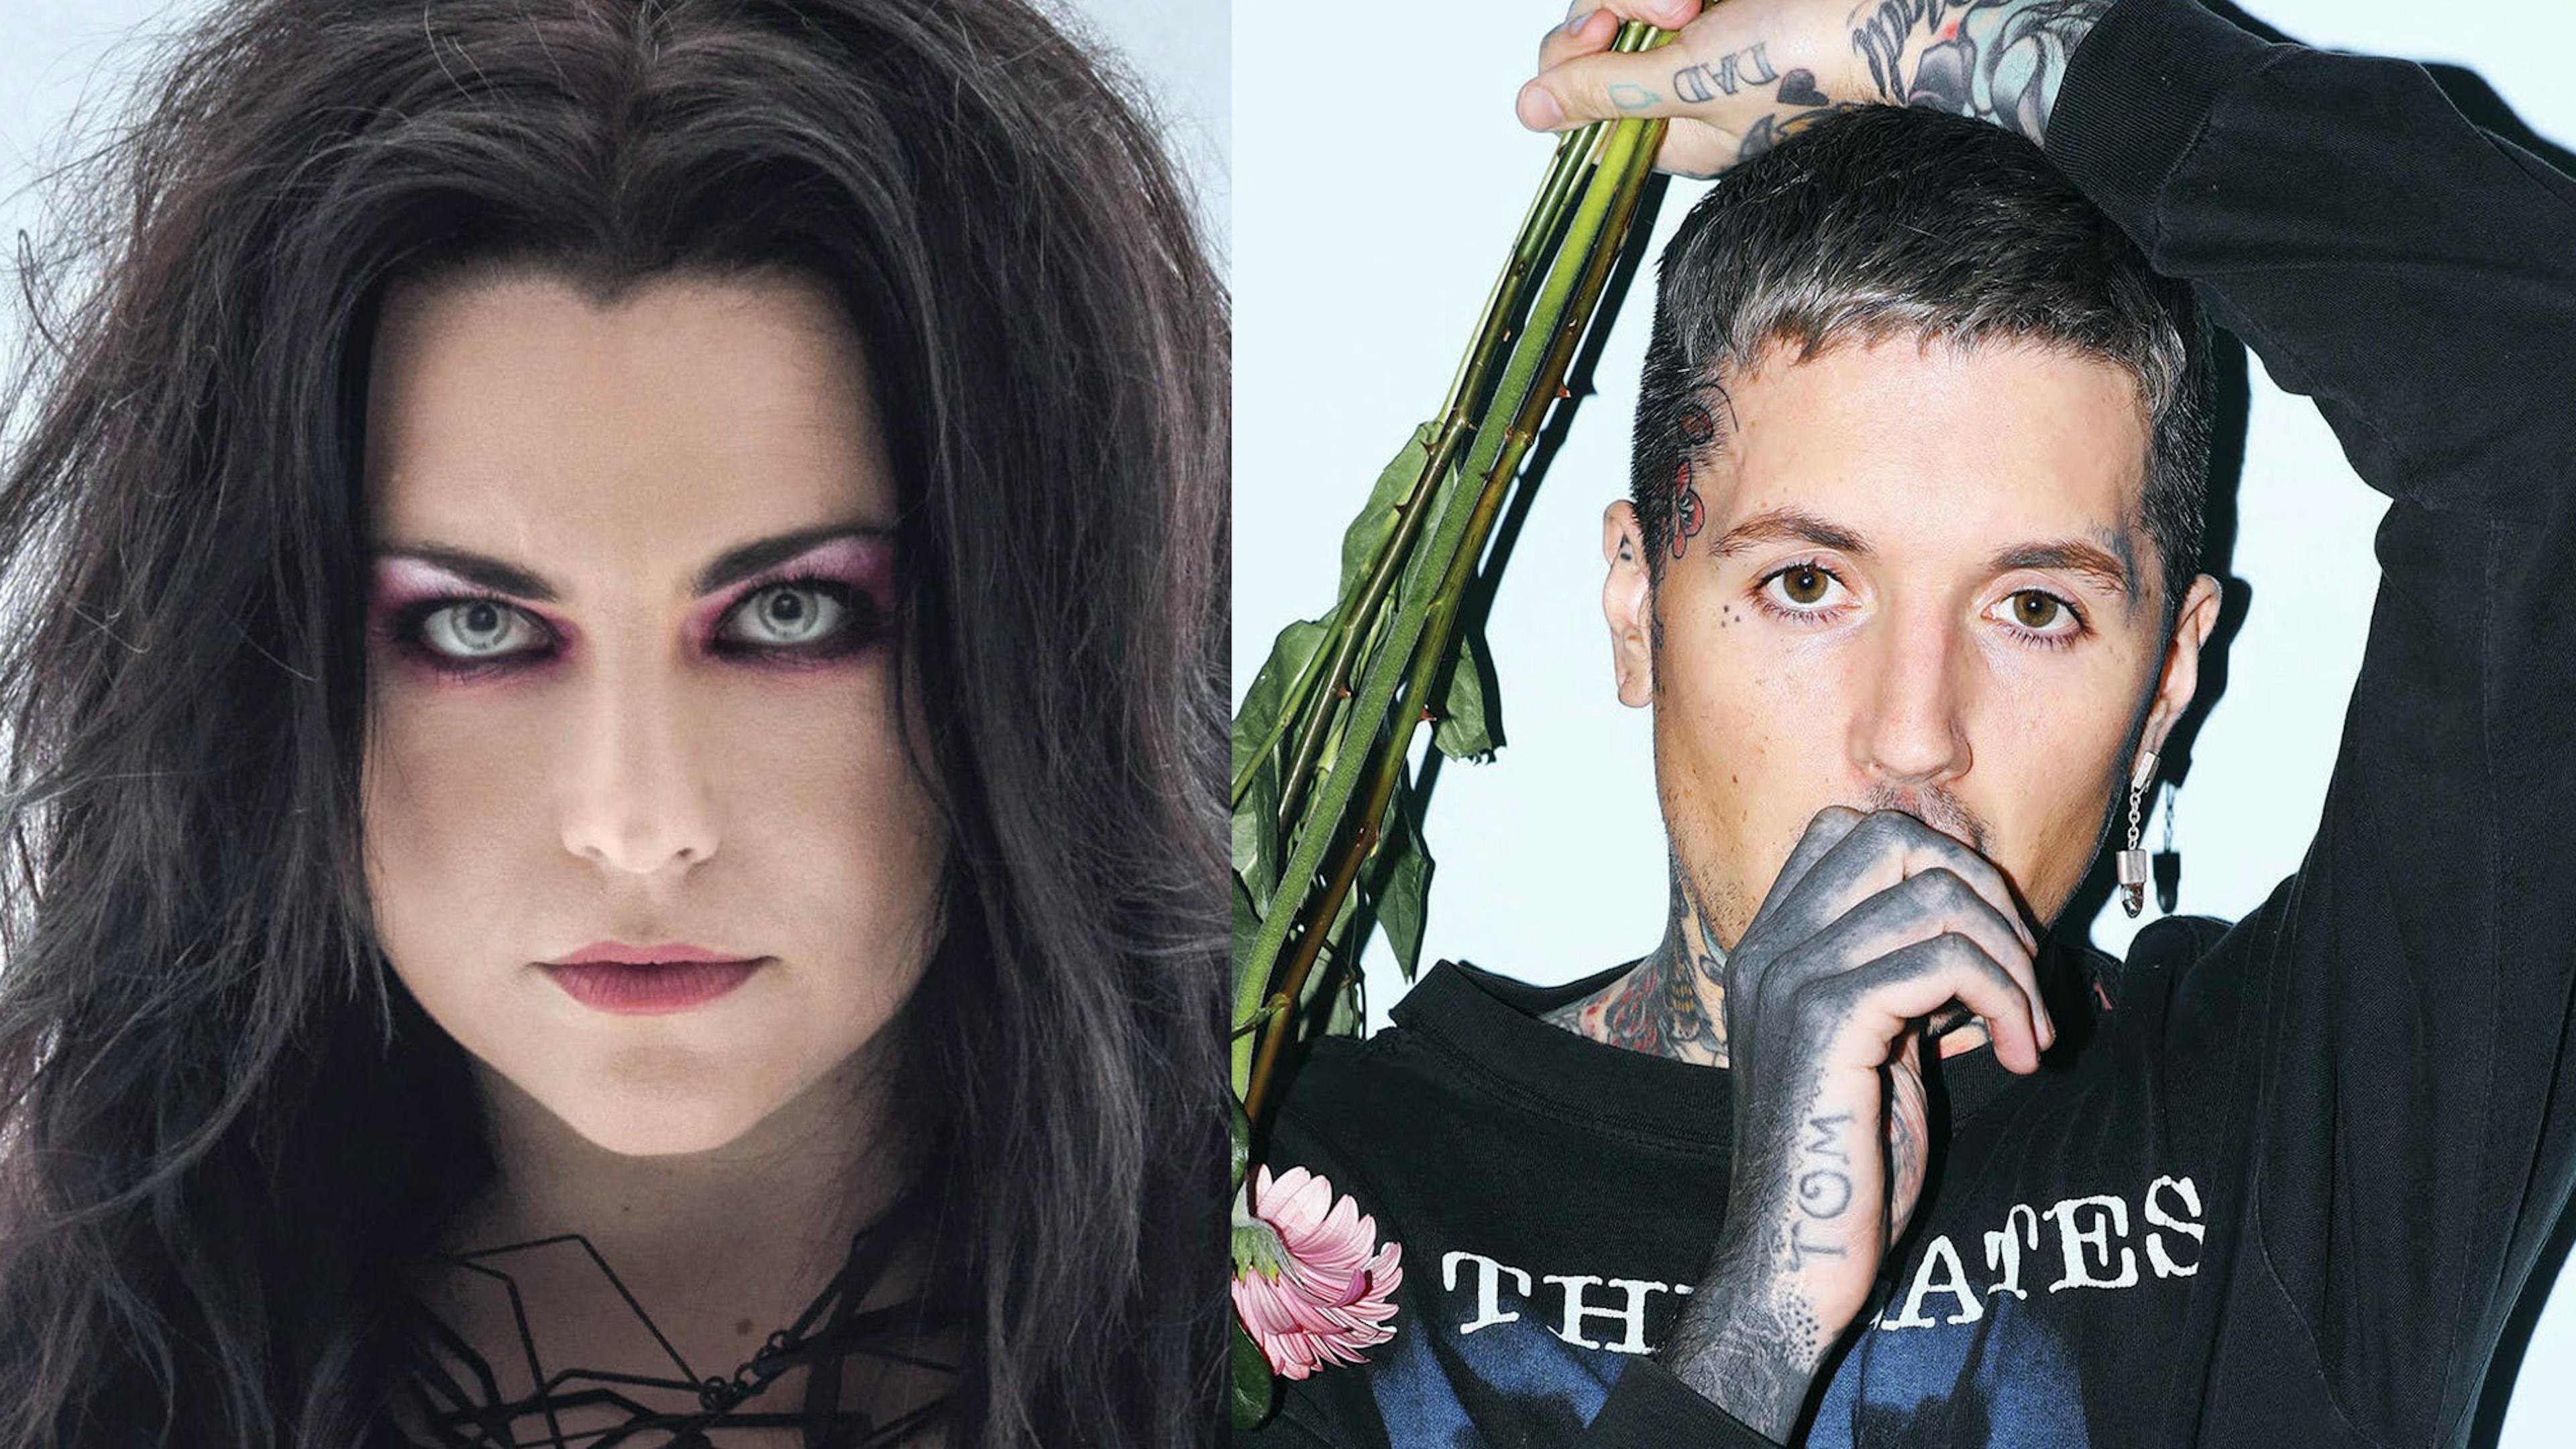 "We both encouraged and pushed each other": Inside BMTH and Amy Lee's collaboration